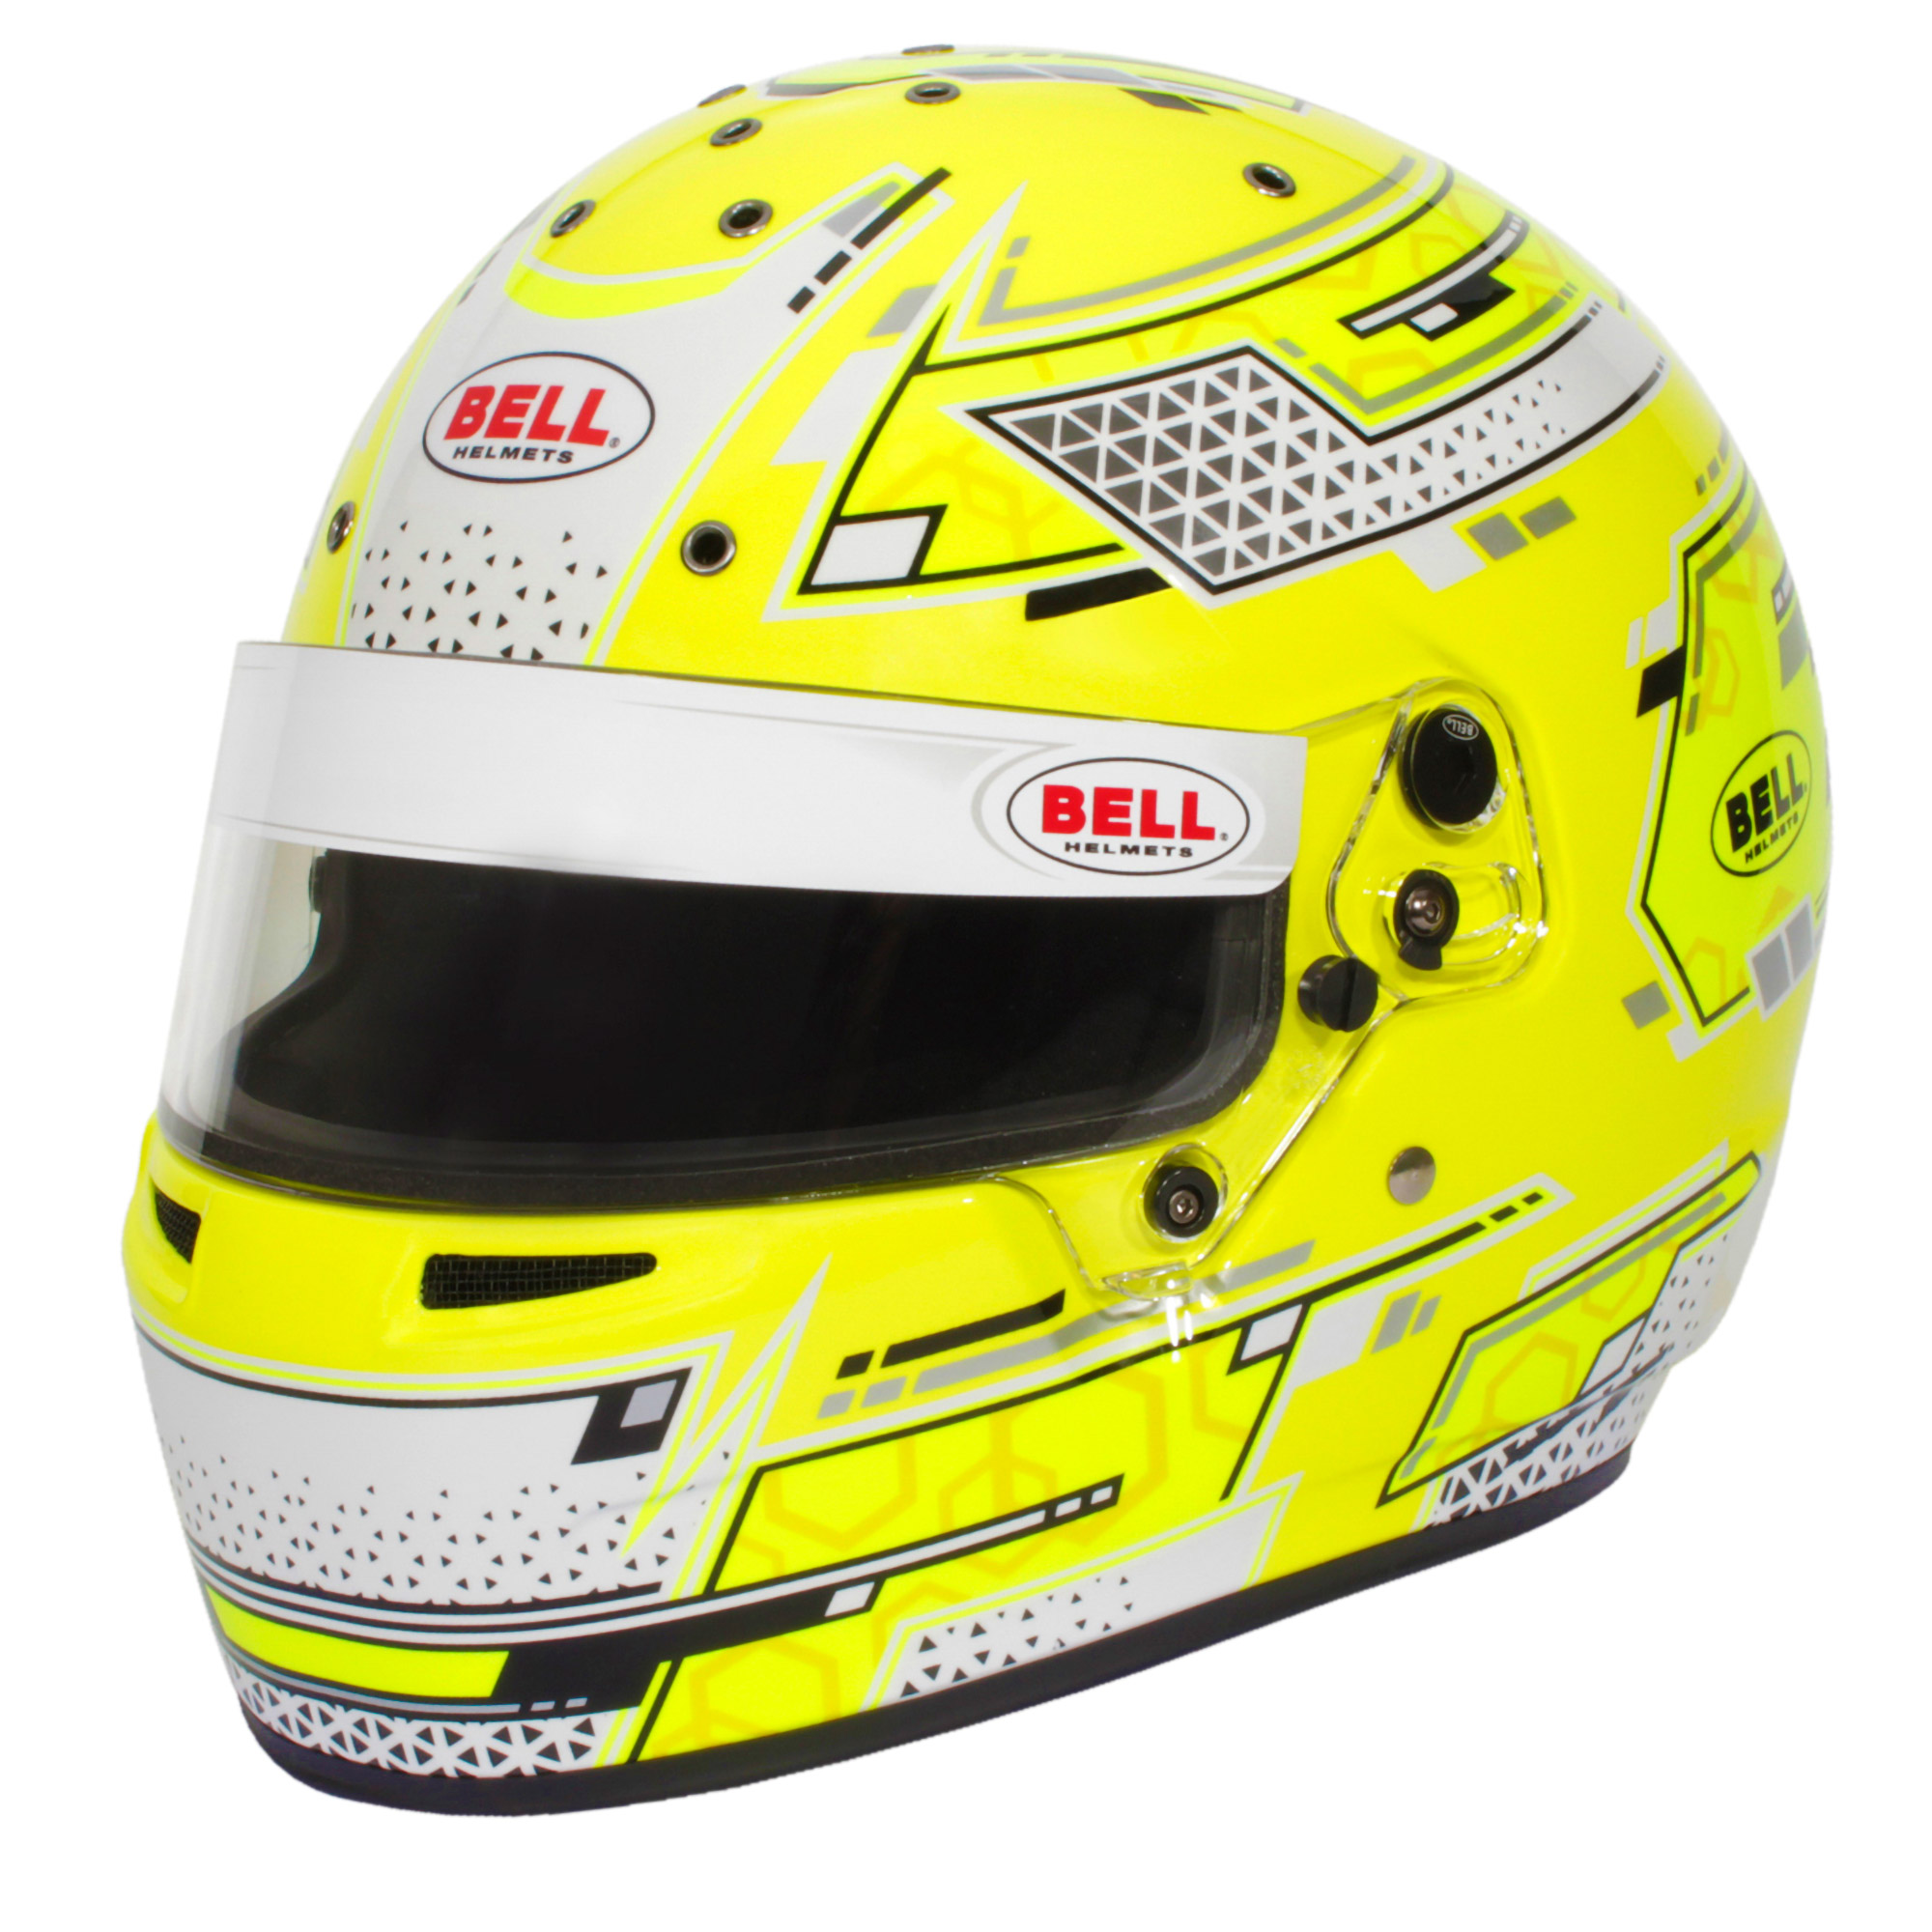 go karts helmets, go karts helmets Suppliers and Manufacturers at